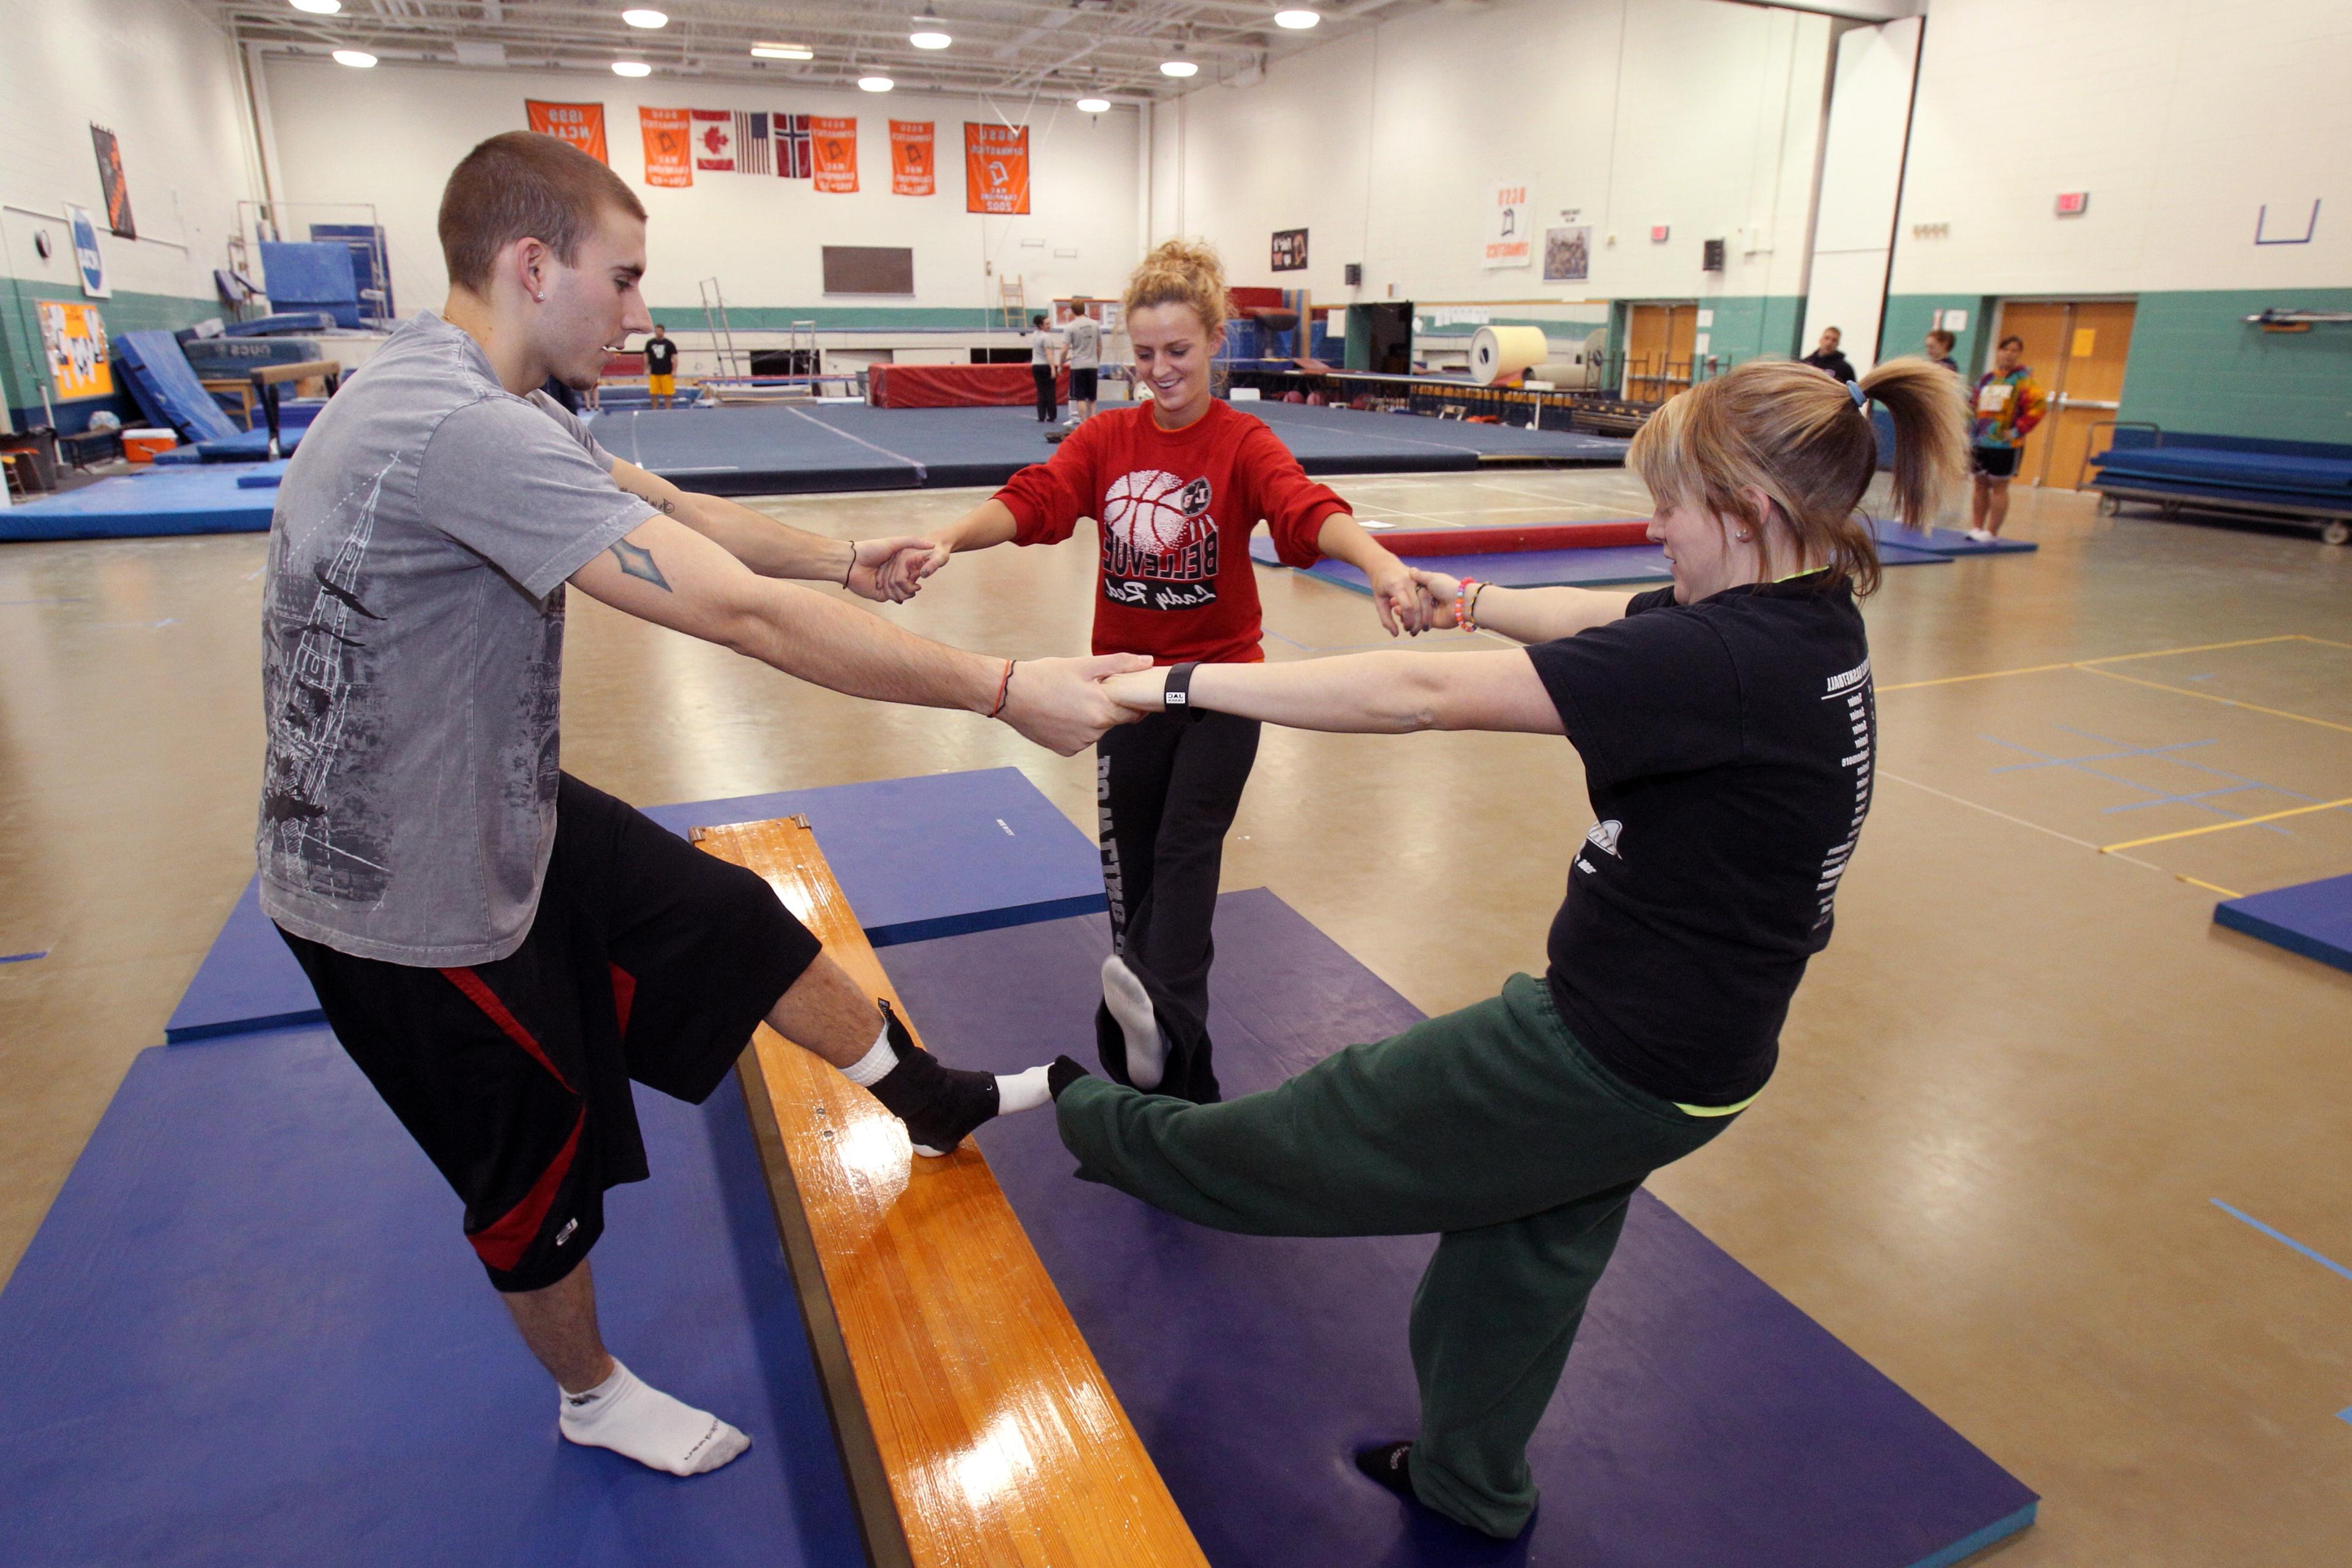 Three BGSU Kinesiology master's students practice strength exercises in a dedicated Fitness Center on our Ohio campus.